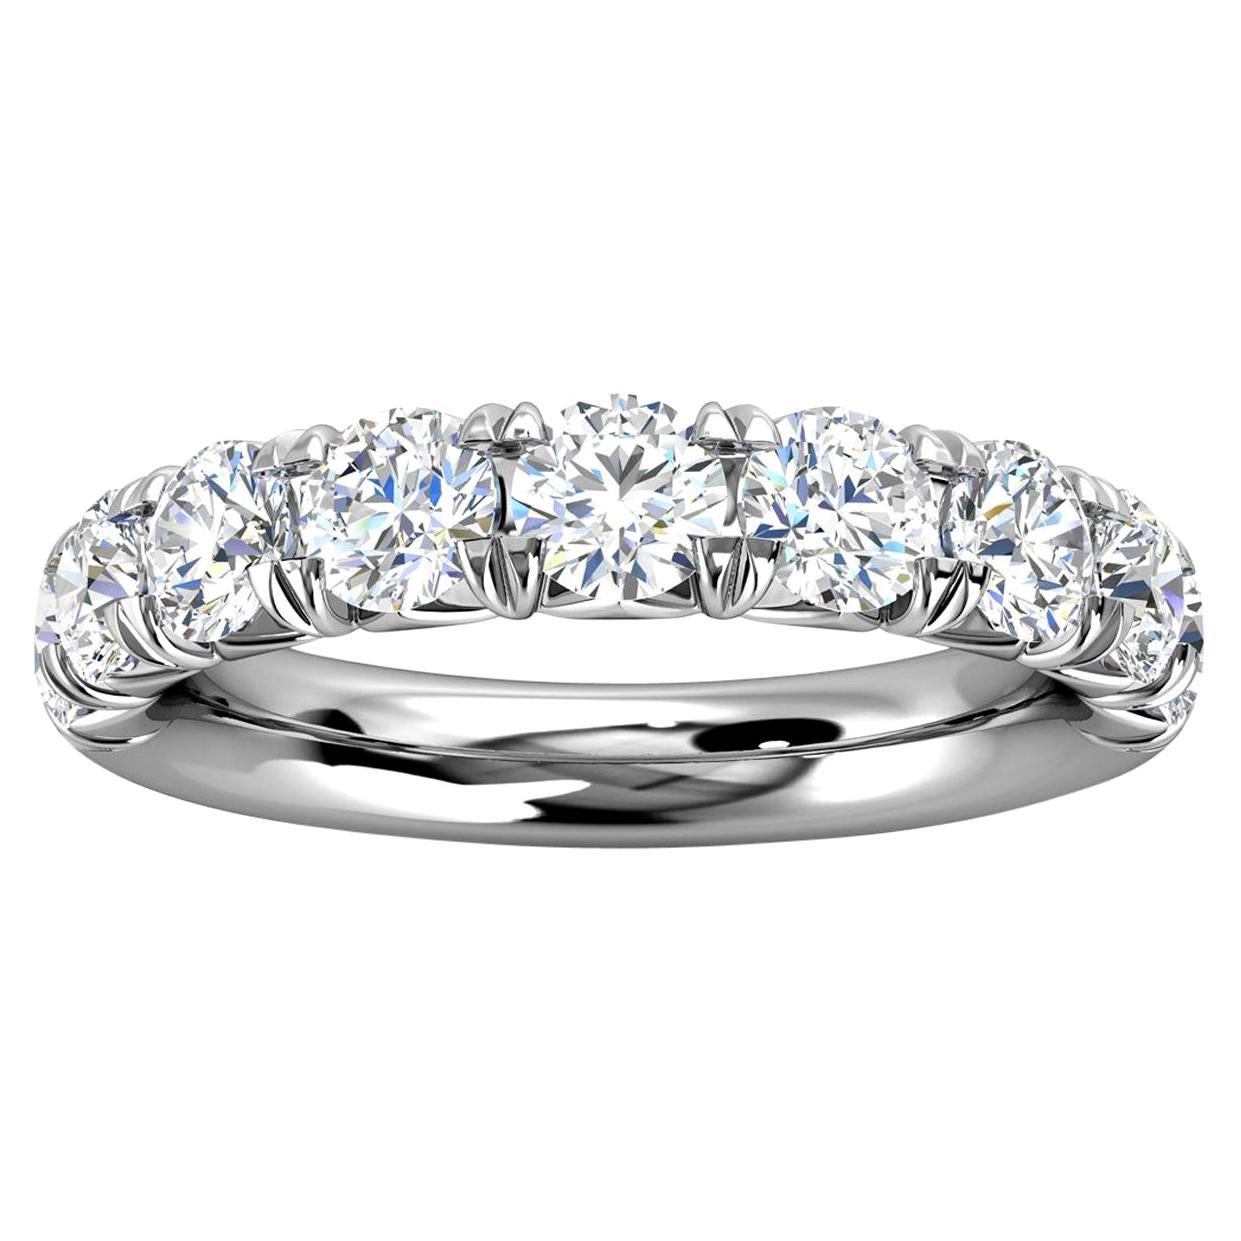 For Sale:  14k White Gold Voyage French Pave Diamond Ring '1 1/2 Ct. Tw'